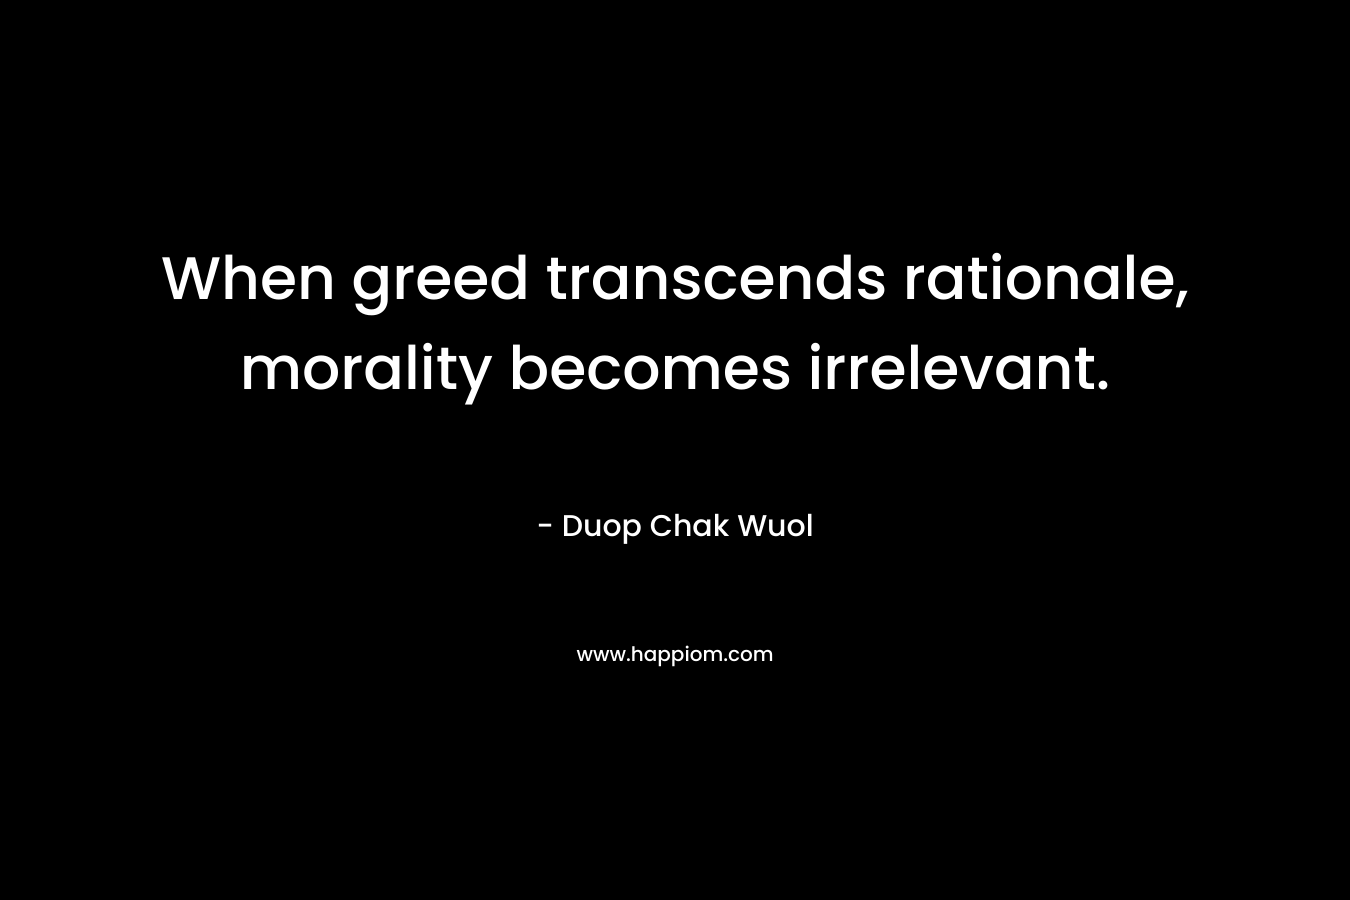 When greed transcends rationale, morality becomes irrelevant. – Duop Chak Wuol